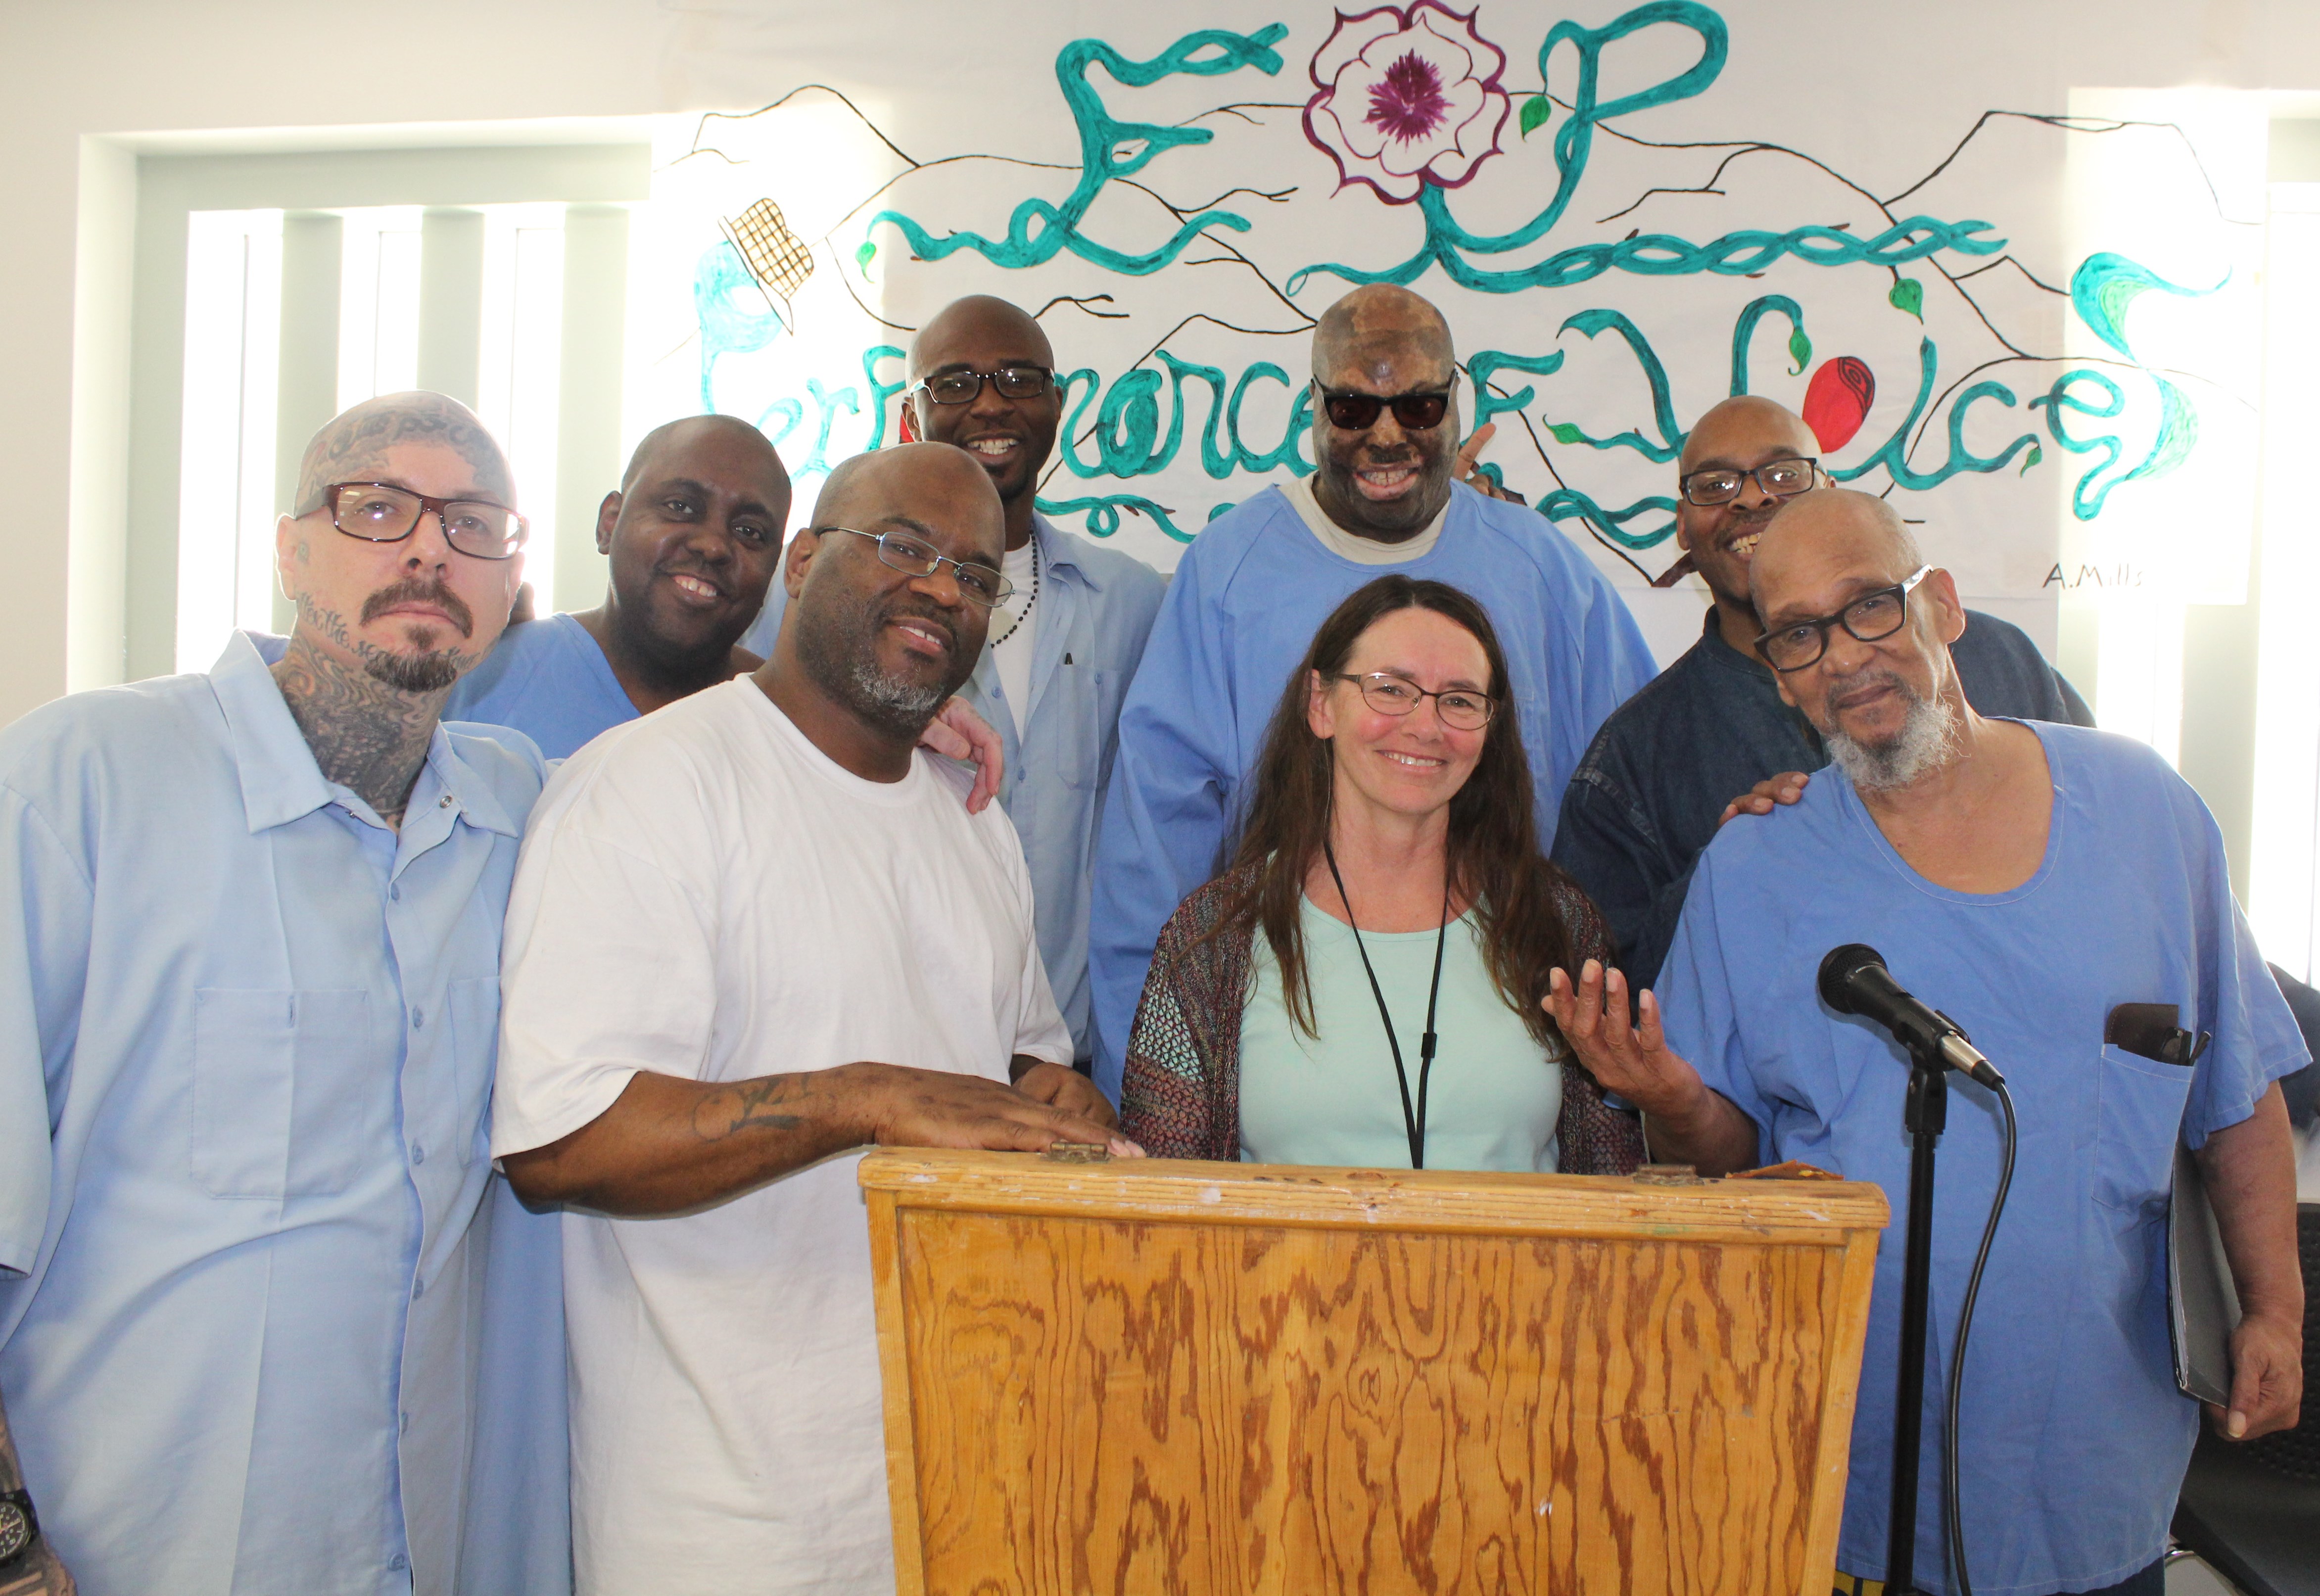 CMF incarcerated residents read poetry from a lectern to the mental health staff.